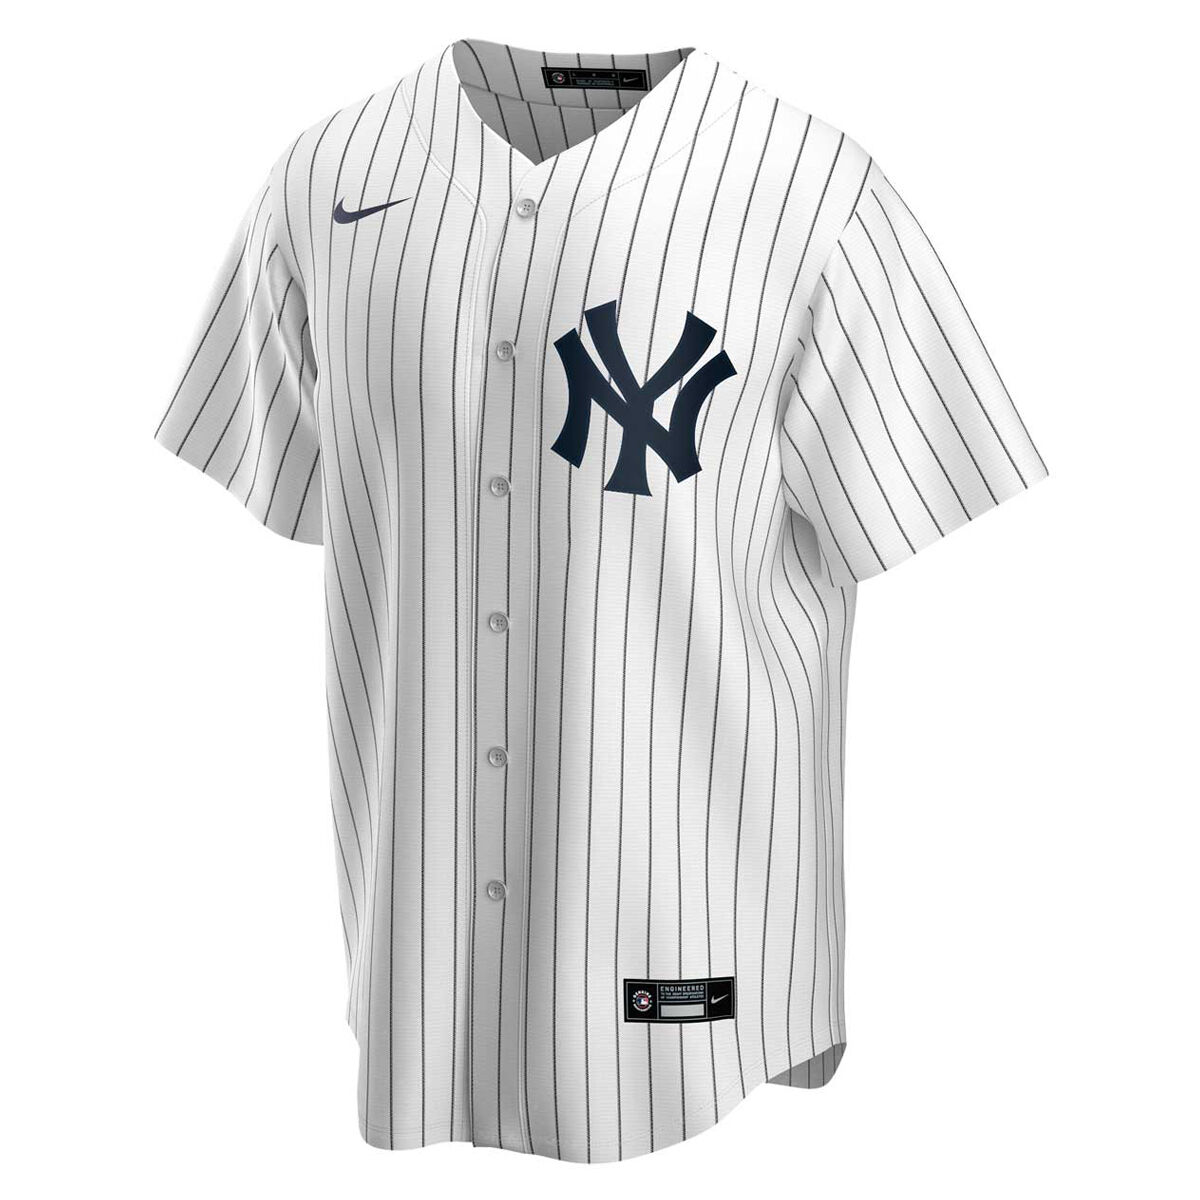 New York Yankees Collection where to buy your Yankees gear  FanNation  A  part of the Sports Illustrated Network